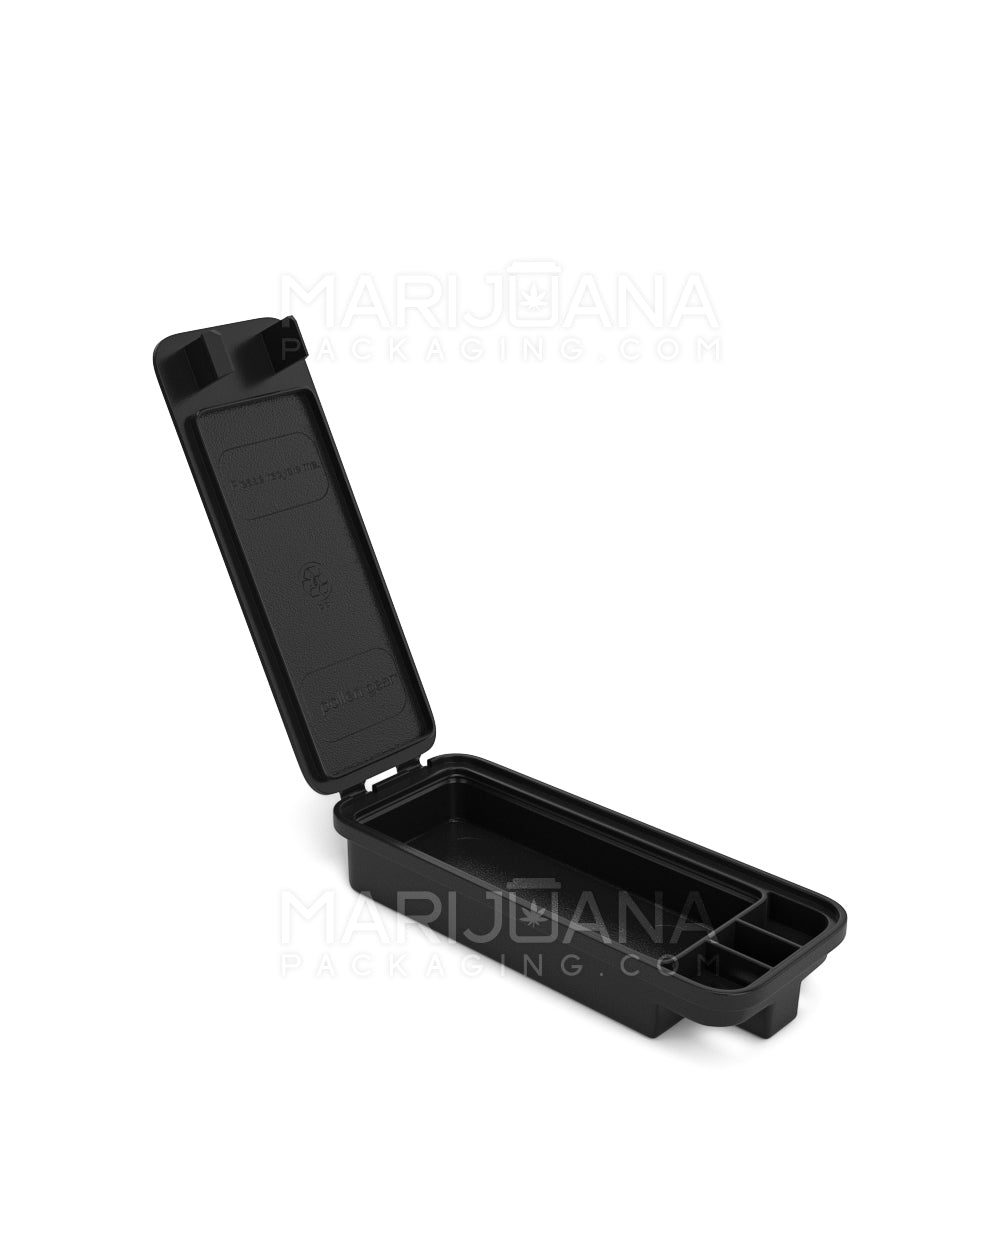 Child Resistant | Snap Box Edible & Pre-Roll Joint Case | Small - Black Plastic - 450 Count - 1